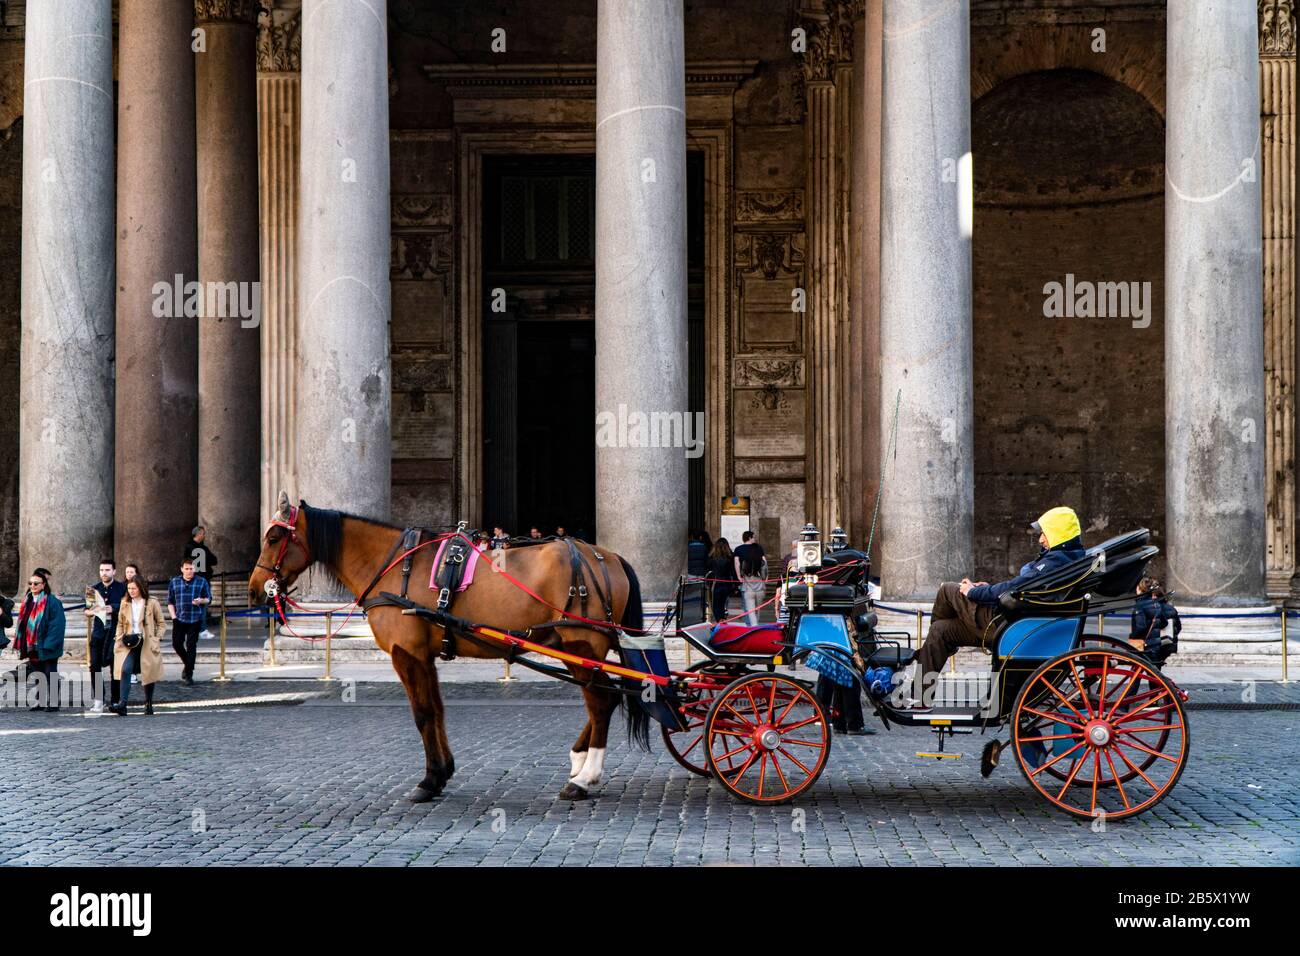 a carriage with horse in the Pantheon square in Rome Stock Photo